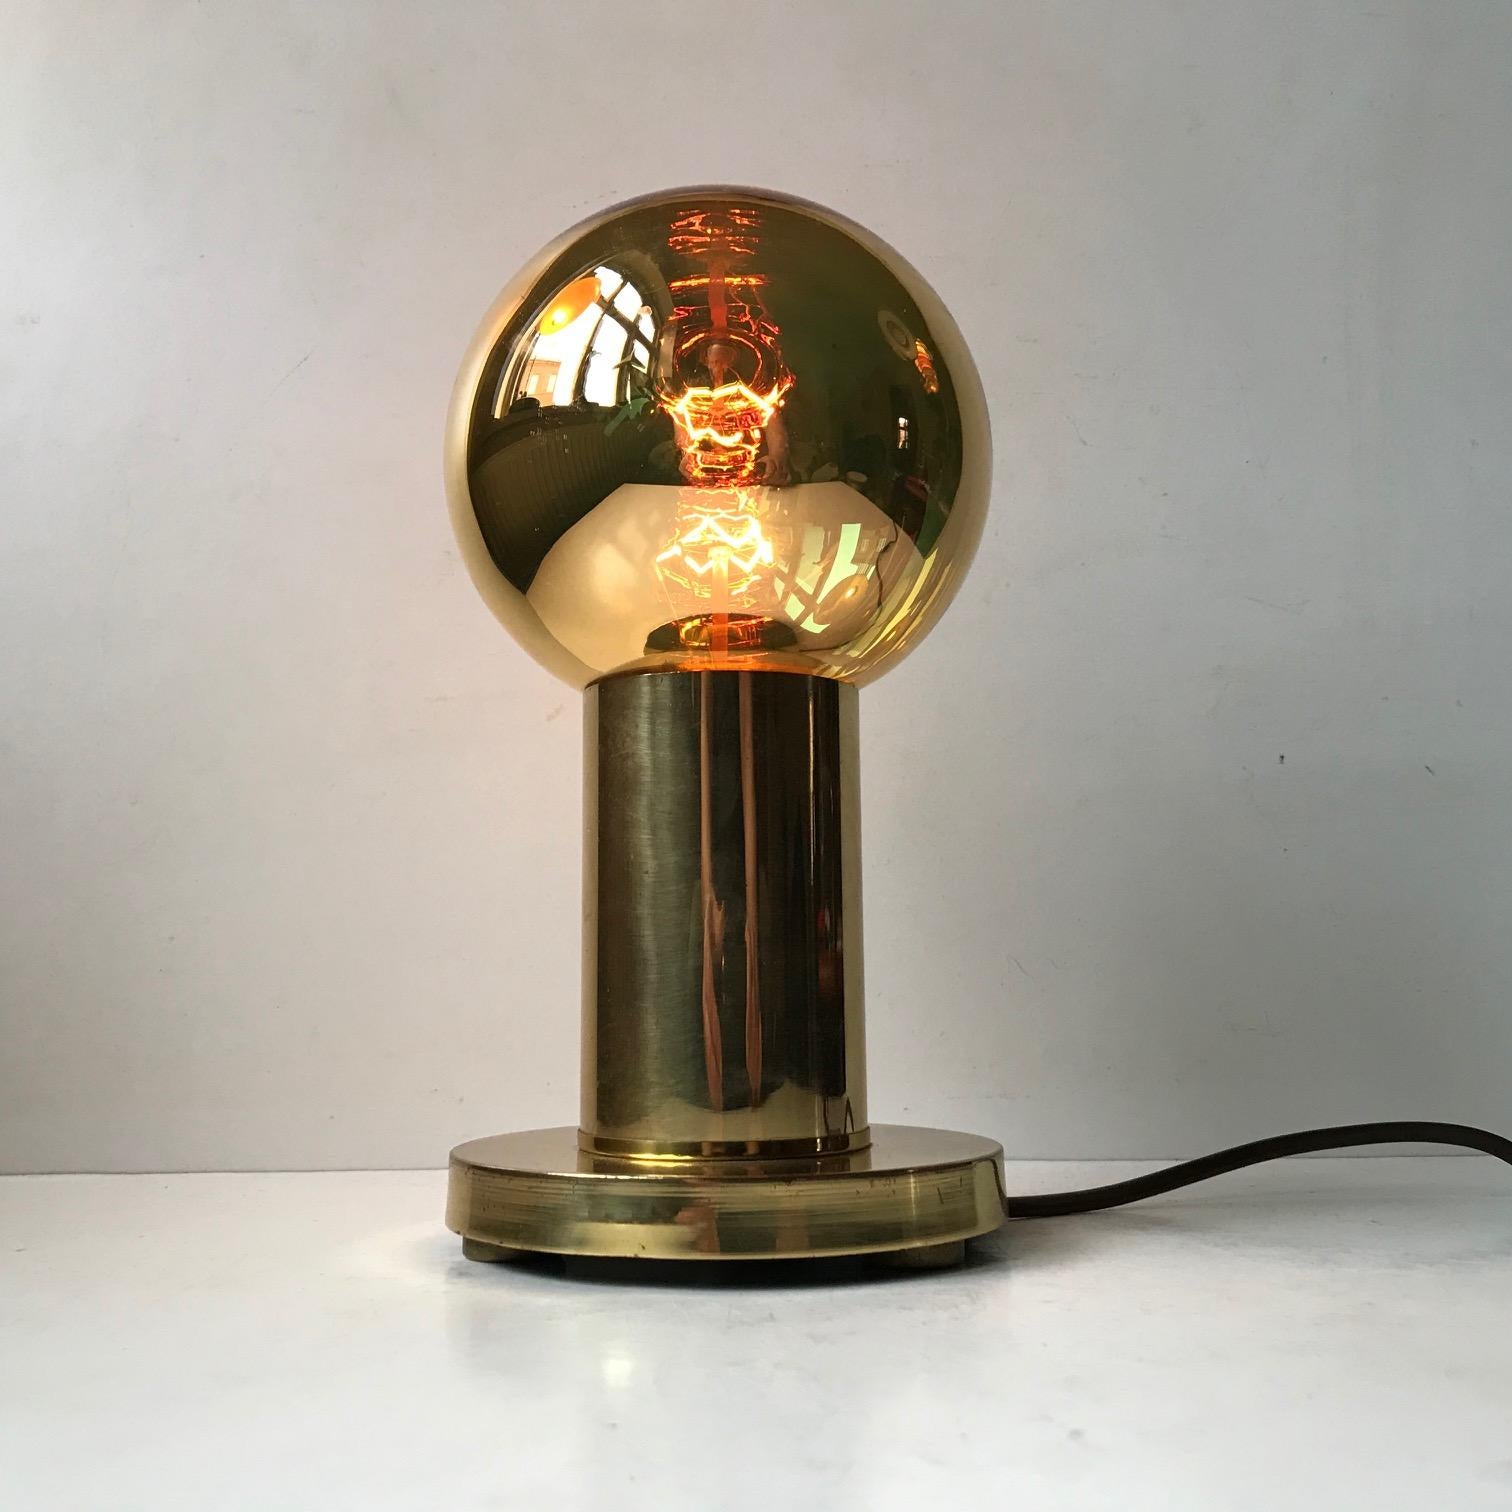 This 'Spy Ball' table lamp was designed and manufactured in the early 1970s by the Danish Design Company Frimann. Featuring a Philips Goldstar 126 everlasting Bulb, the golden bulb reflects its surroundings when unlit, hence the name 'Spy Ball'.
 